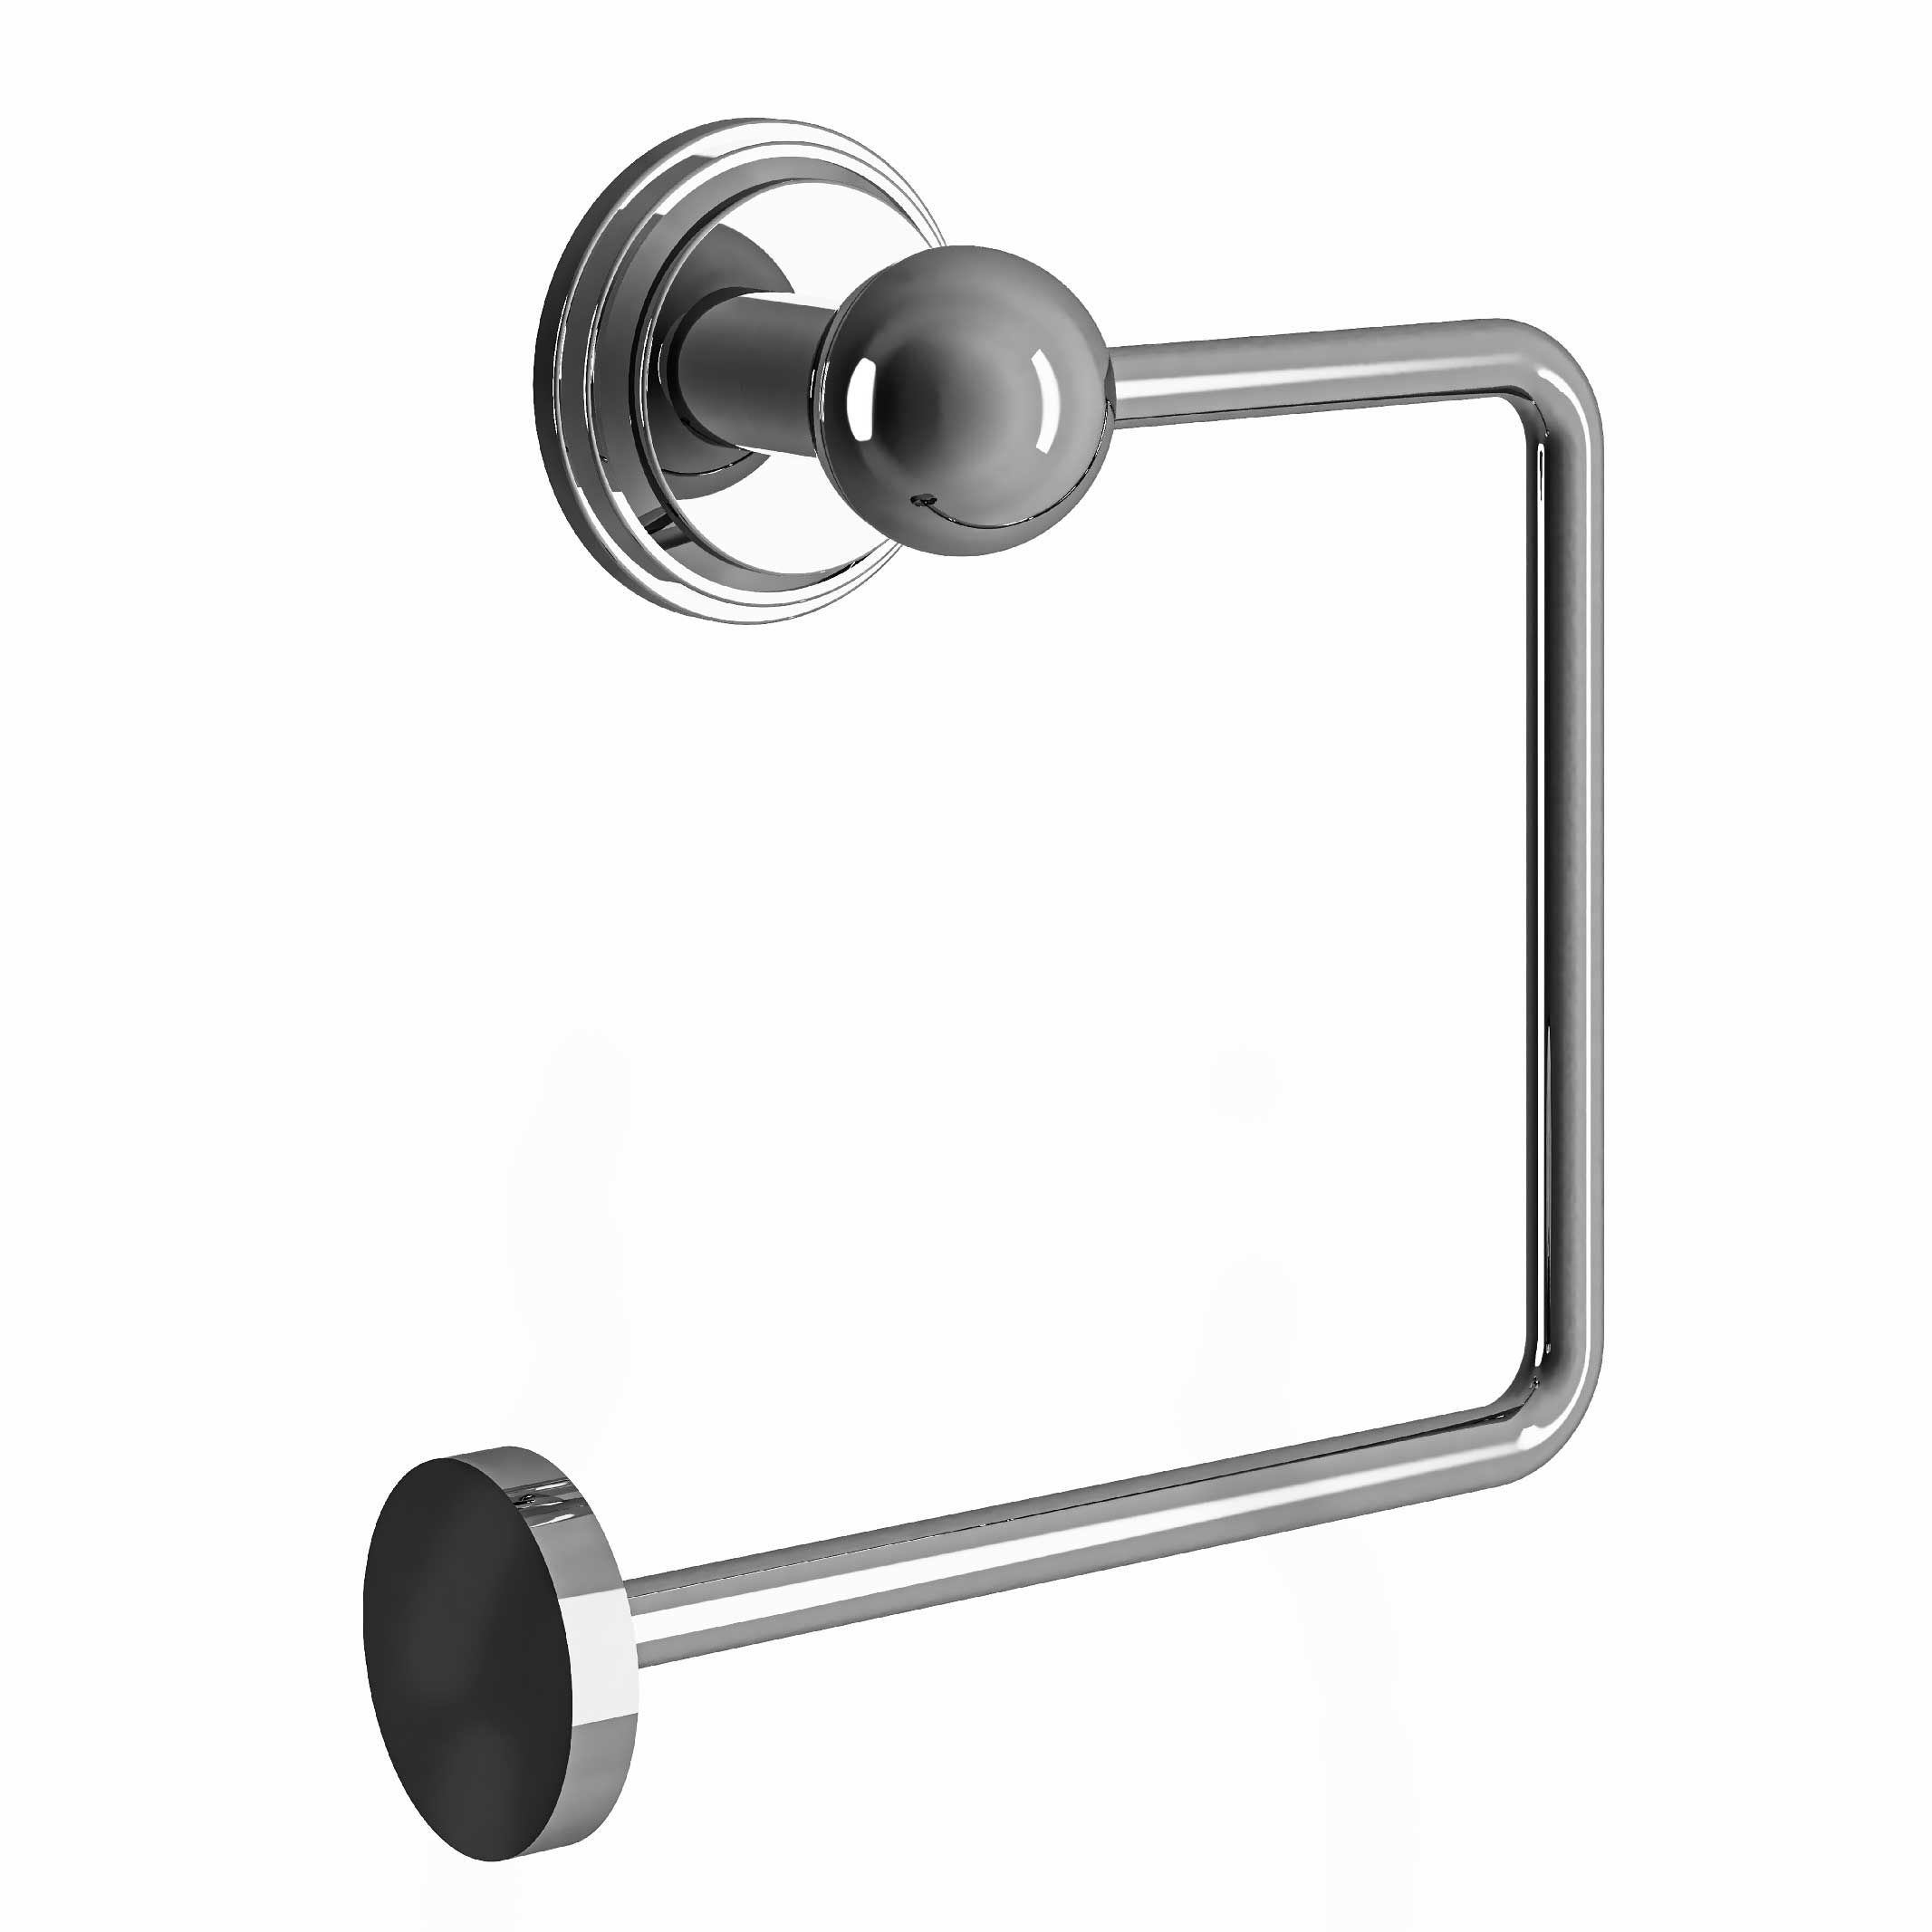 M60-504 Toilet roll holder without cover